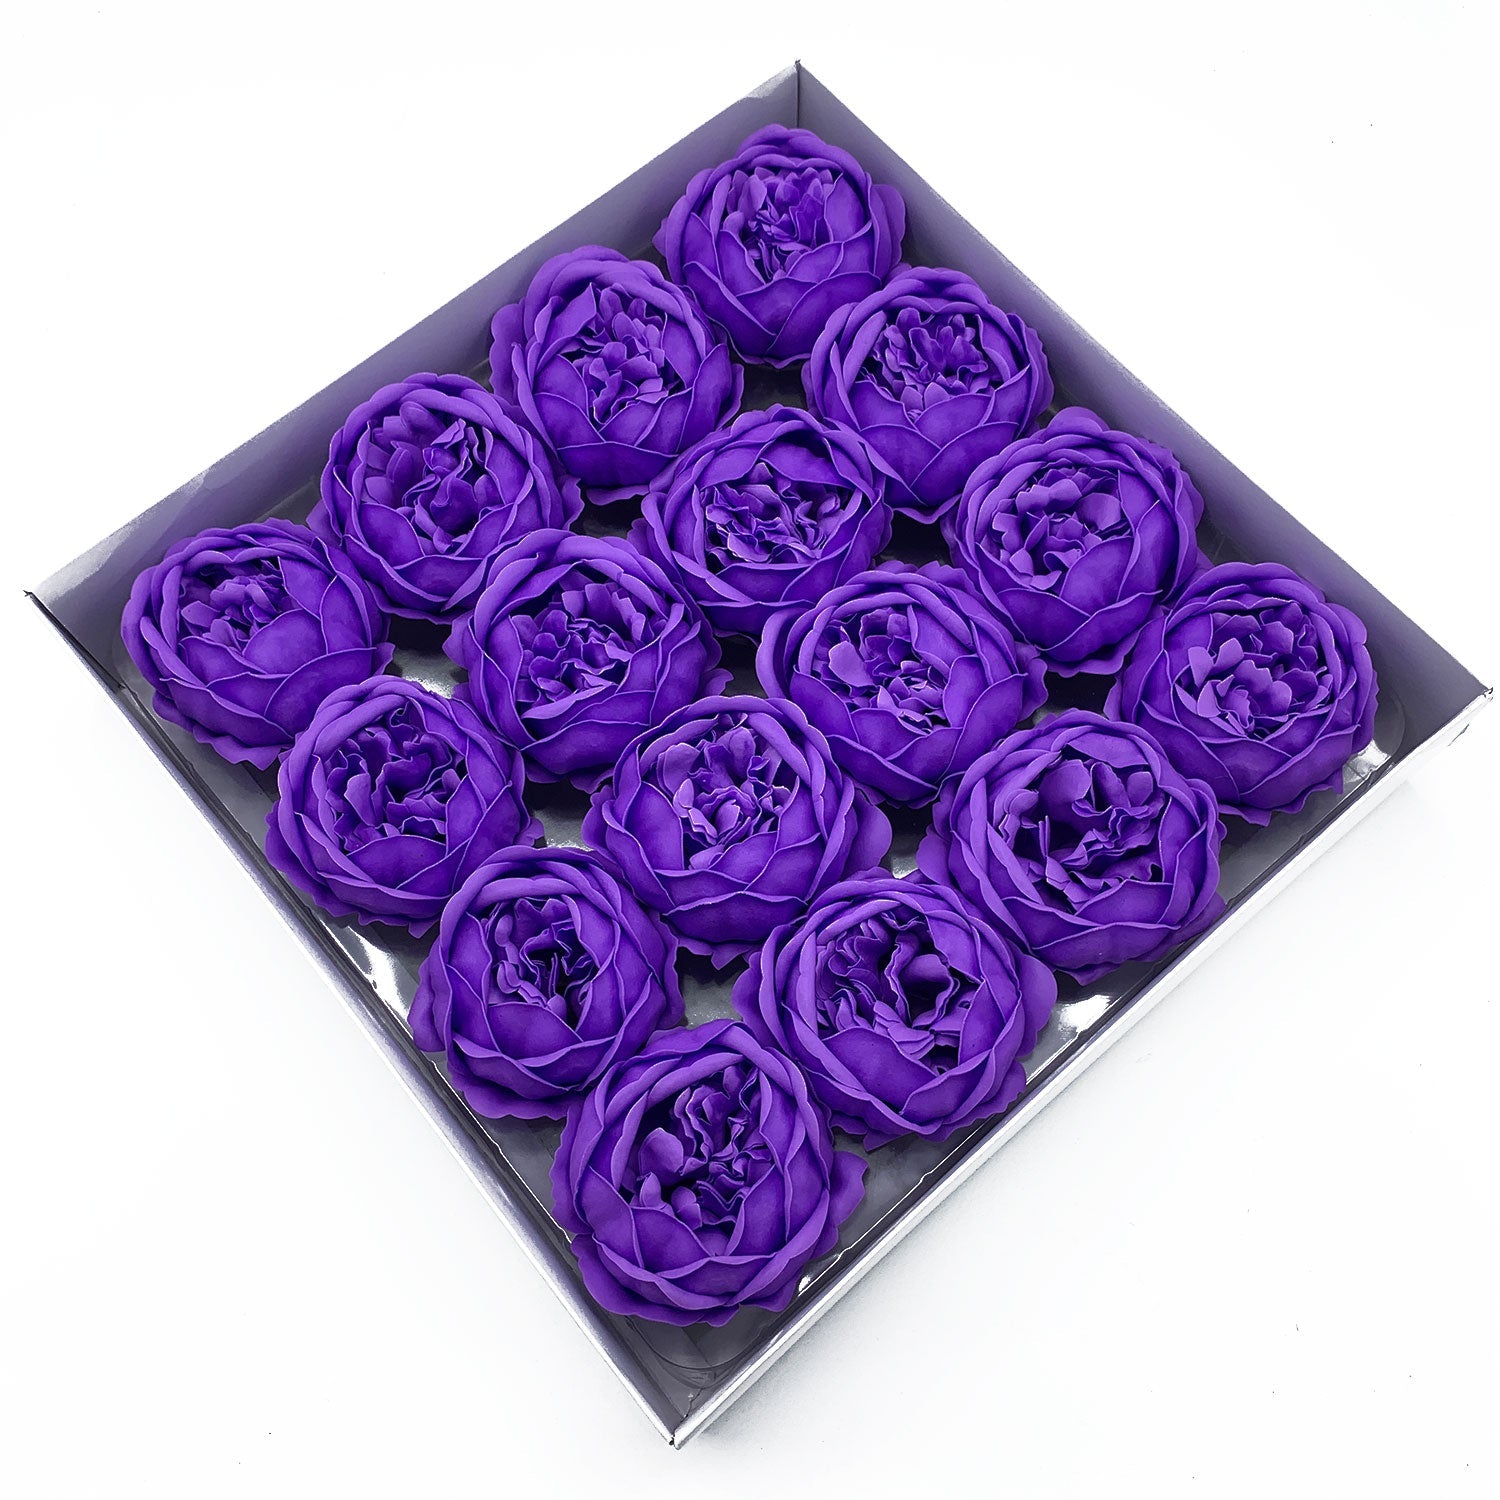 Craft Soap Flower - Ext Large Peony - Lavender - £38.0 - 